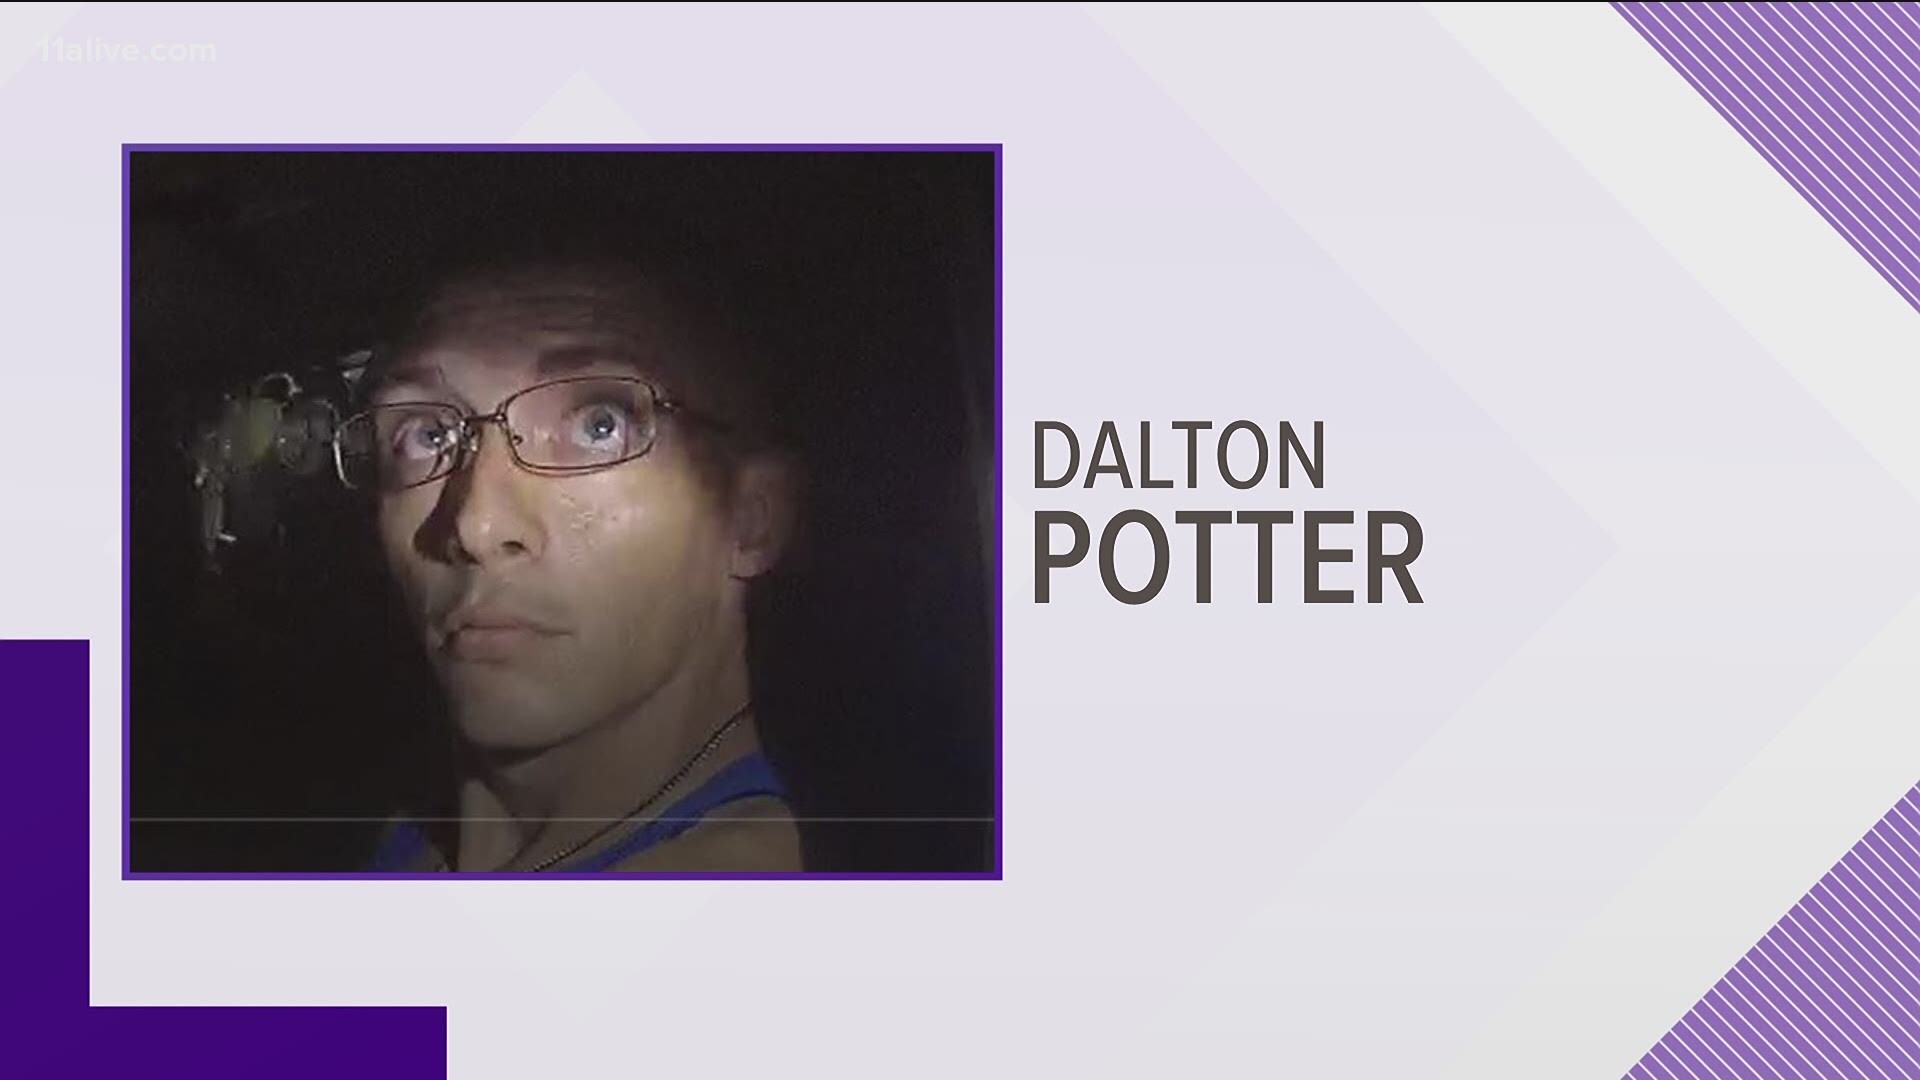 Dalton Potter was accused of opening fire on a Georgia deputy this week.